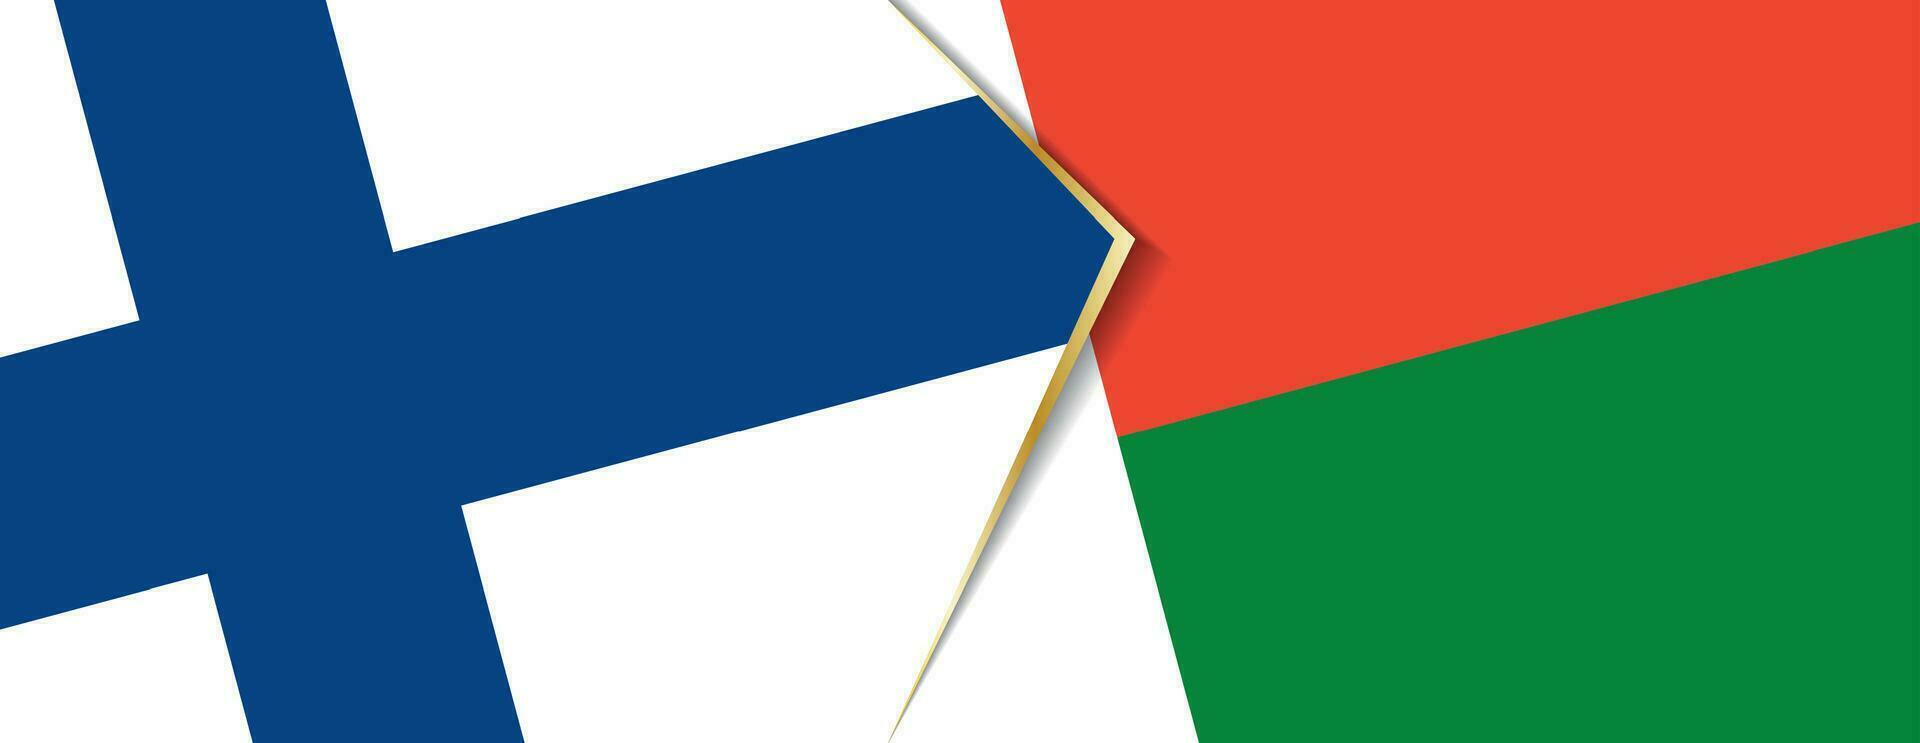 Finland and Madagascar flags, two vector flags.